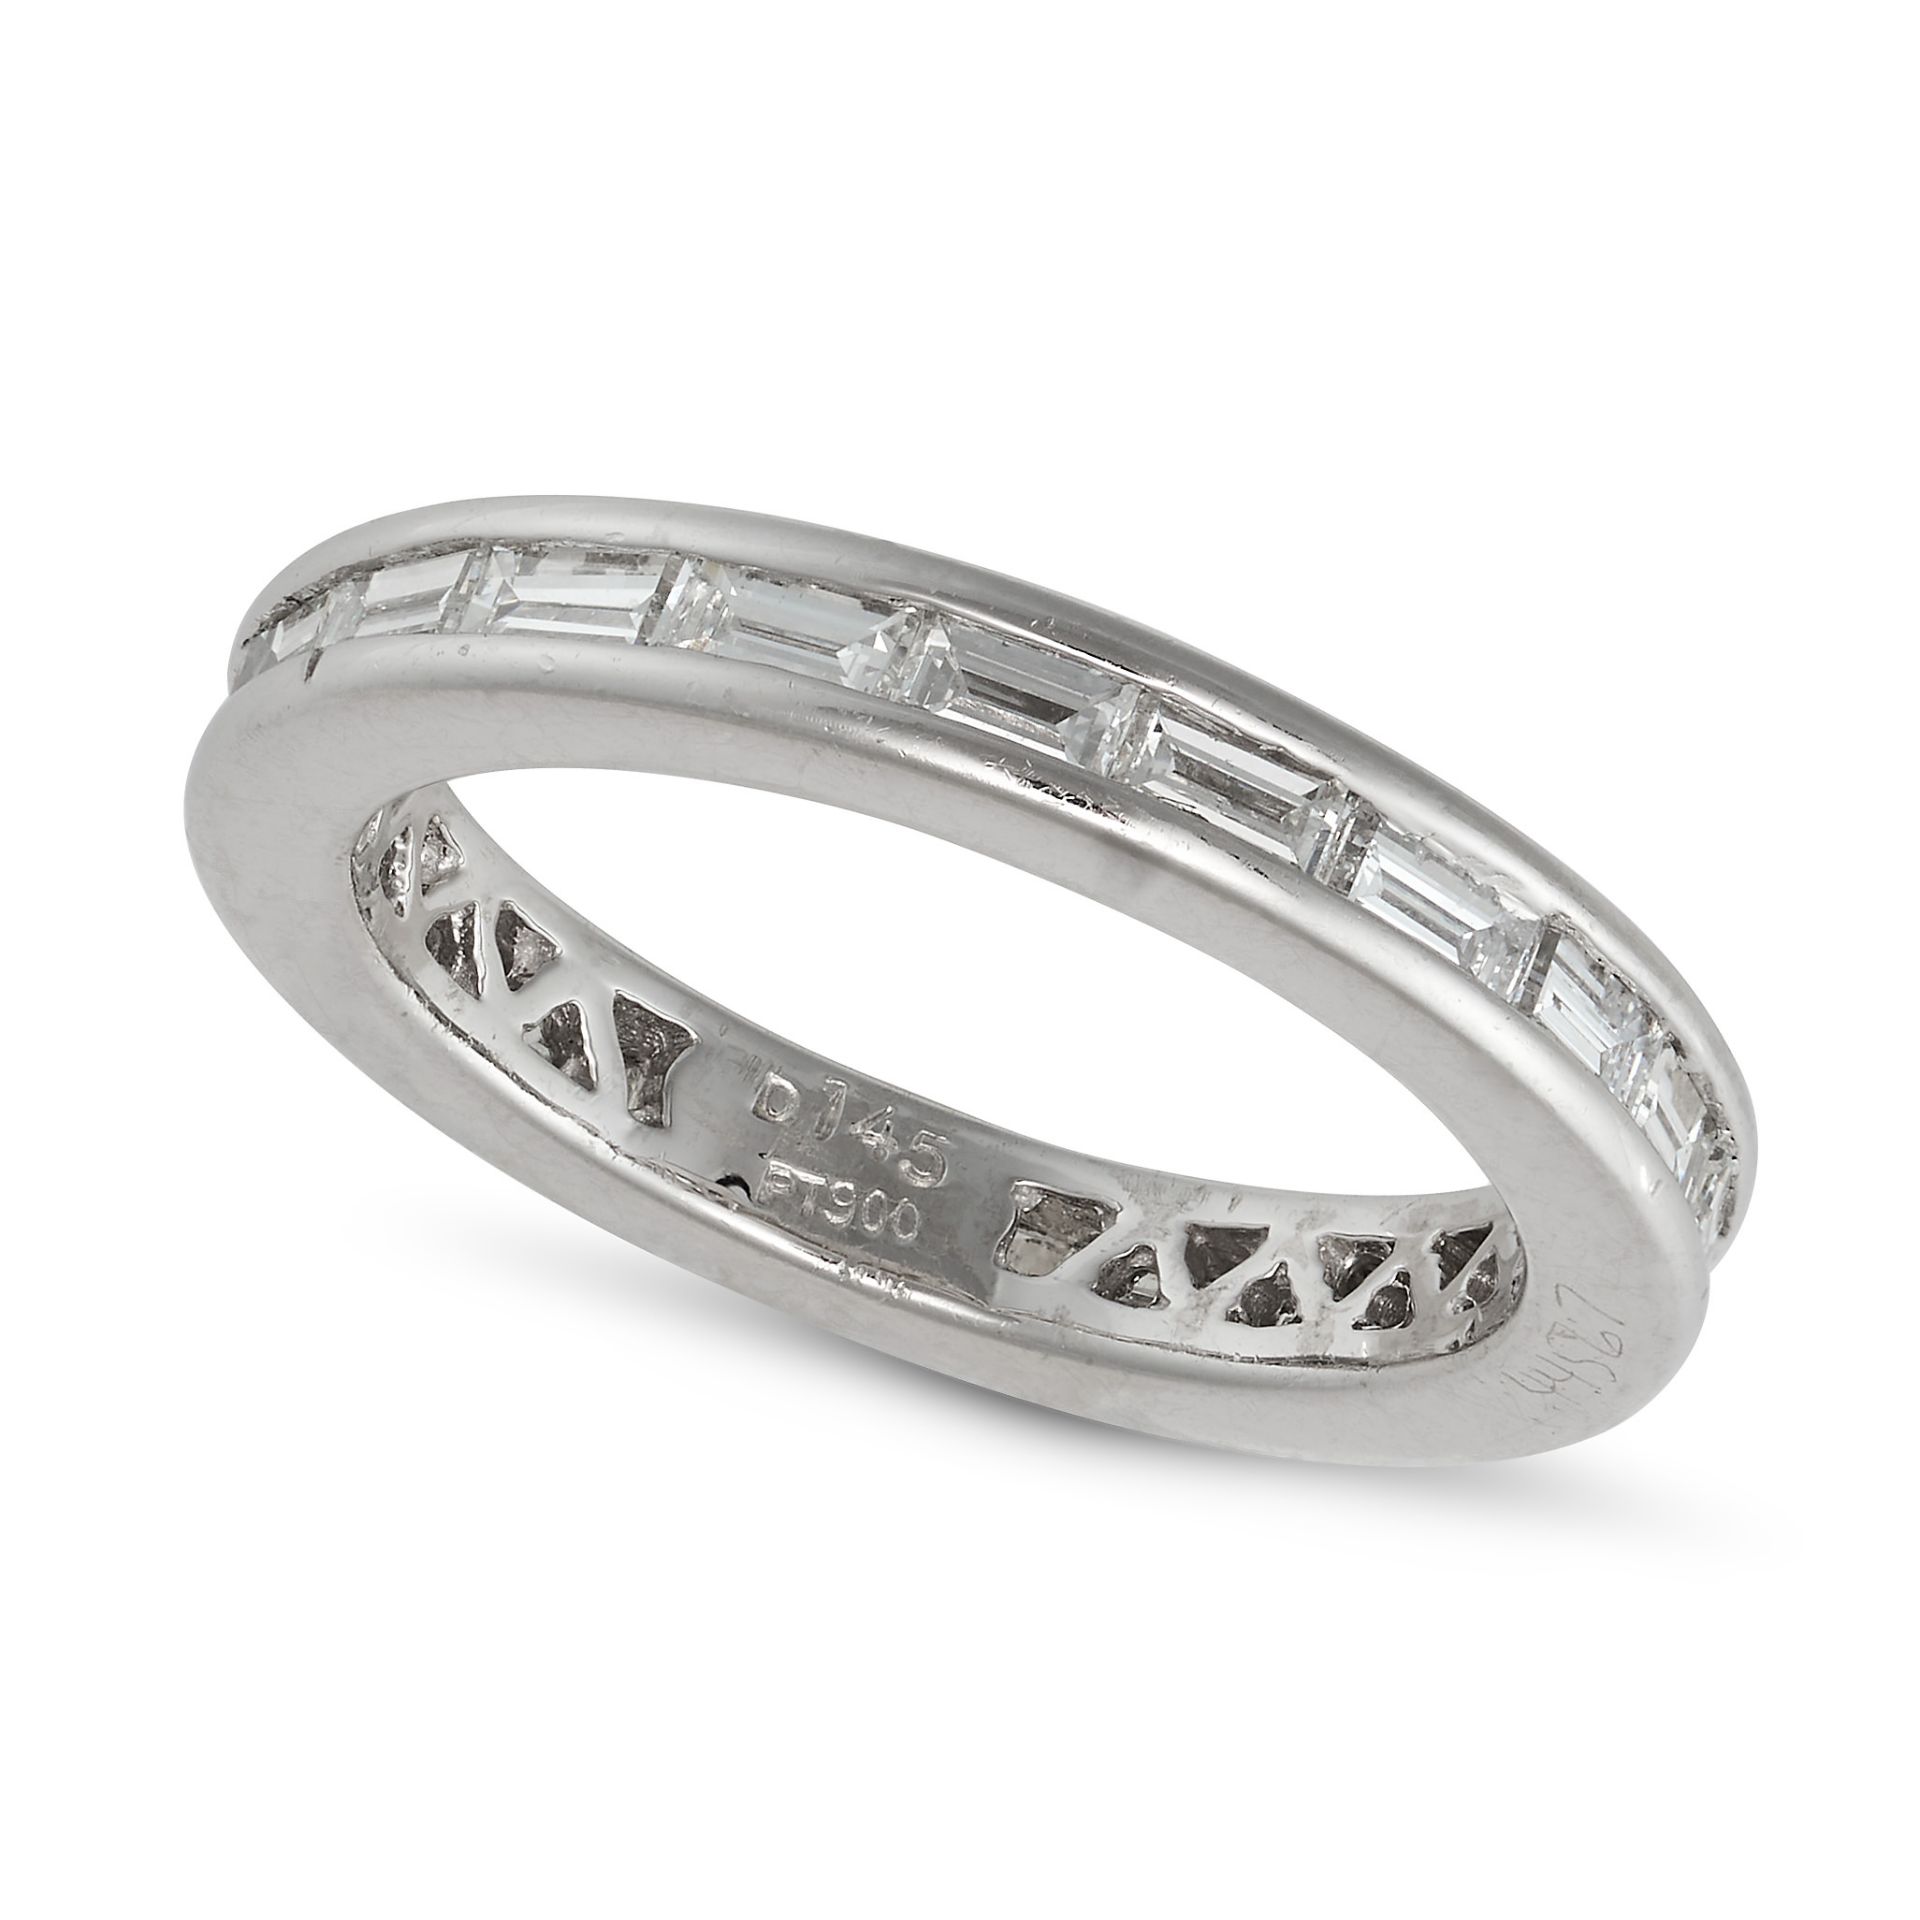 JACOB & CO, A DIAMOND ETERNITY RING in platinum, set all around with a row of baguette cut diamon...